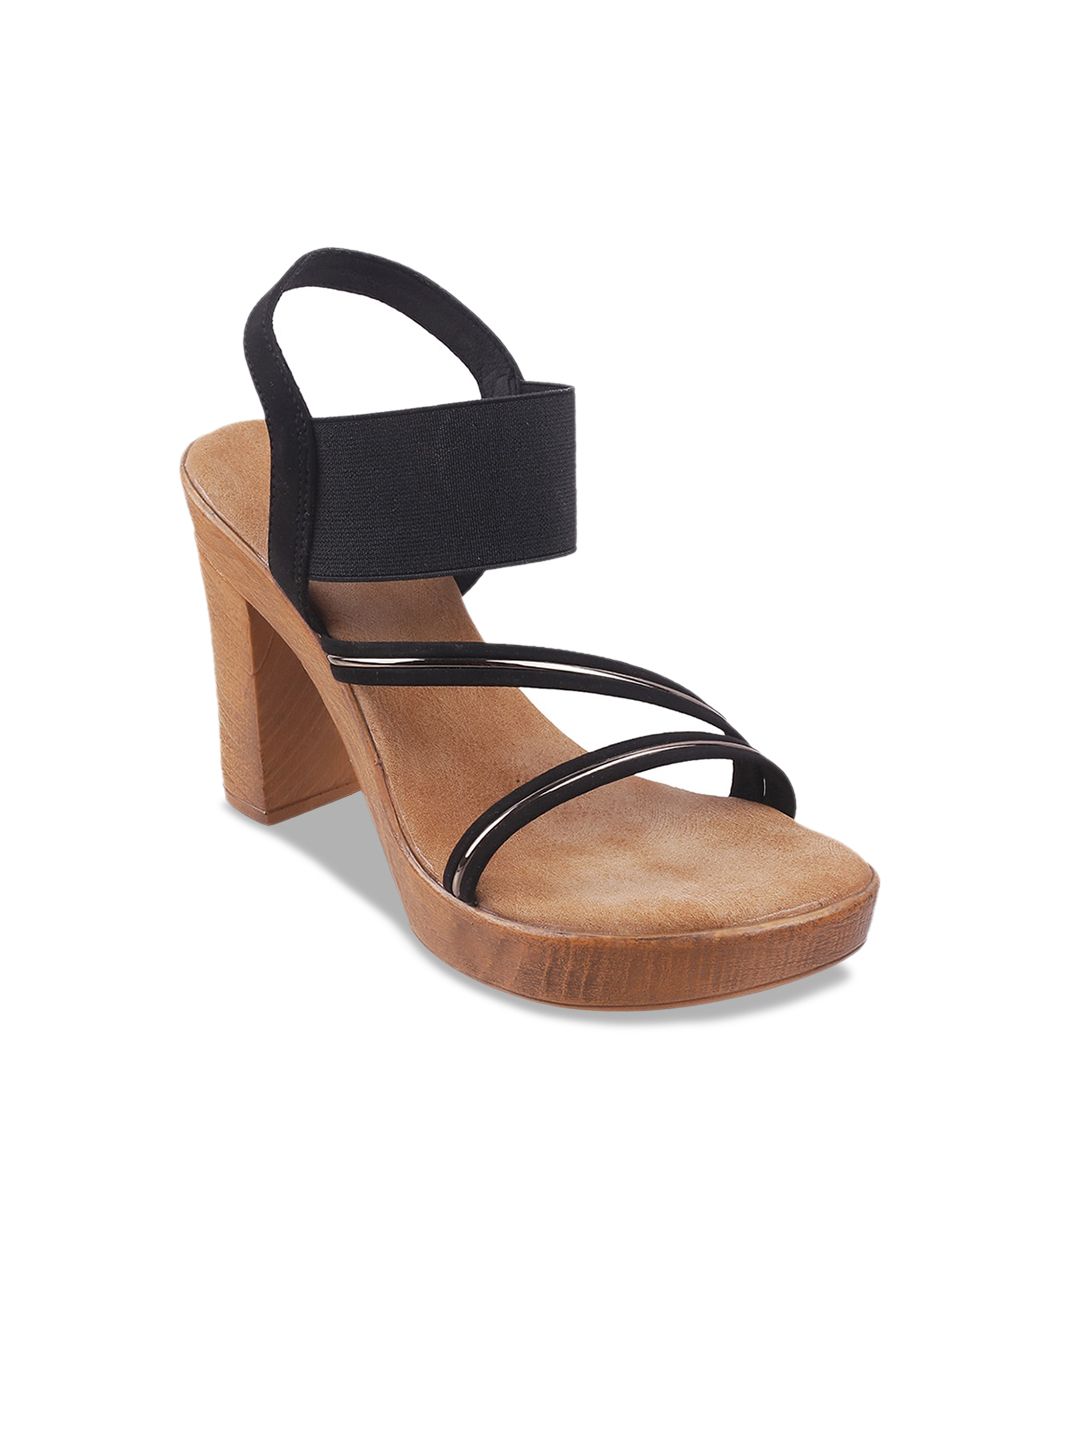 Mochi Women Black Solid Sandals Price in India